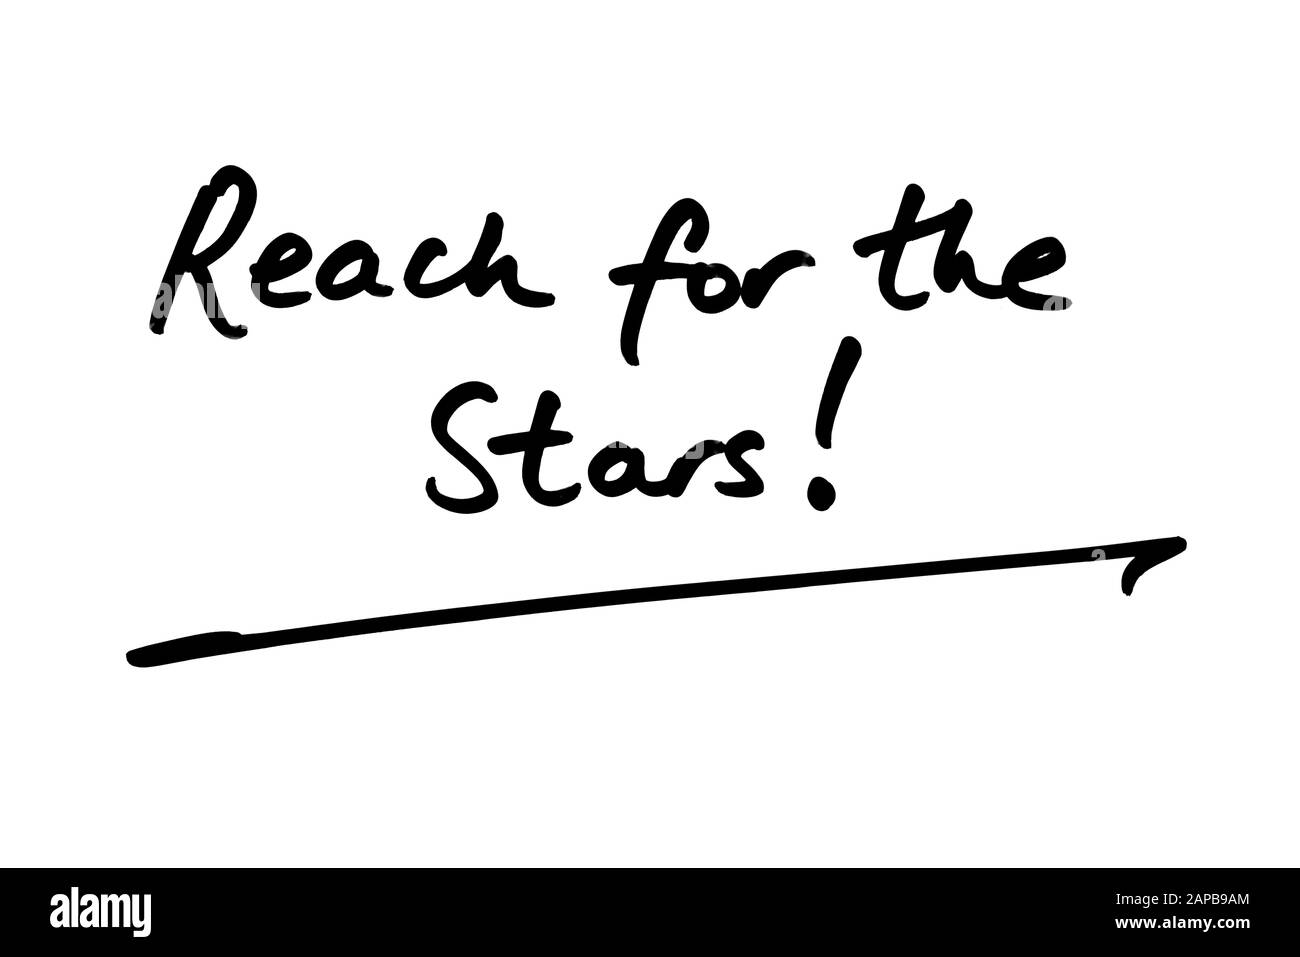 Reach for the Stars! handwritten on a white background. Stock Photo